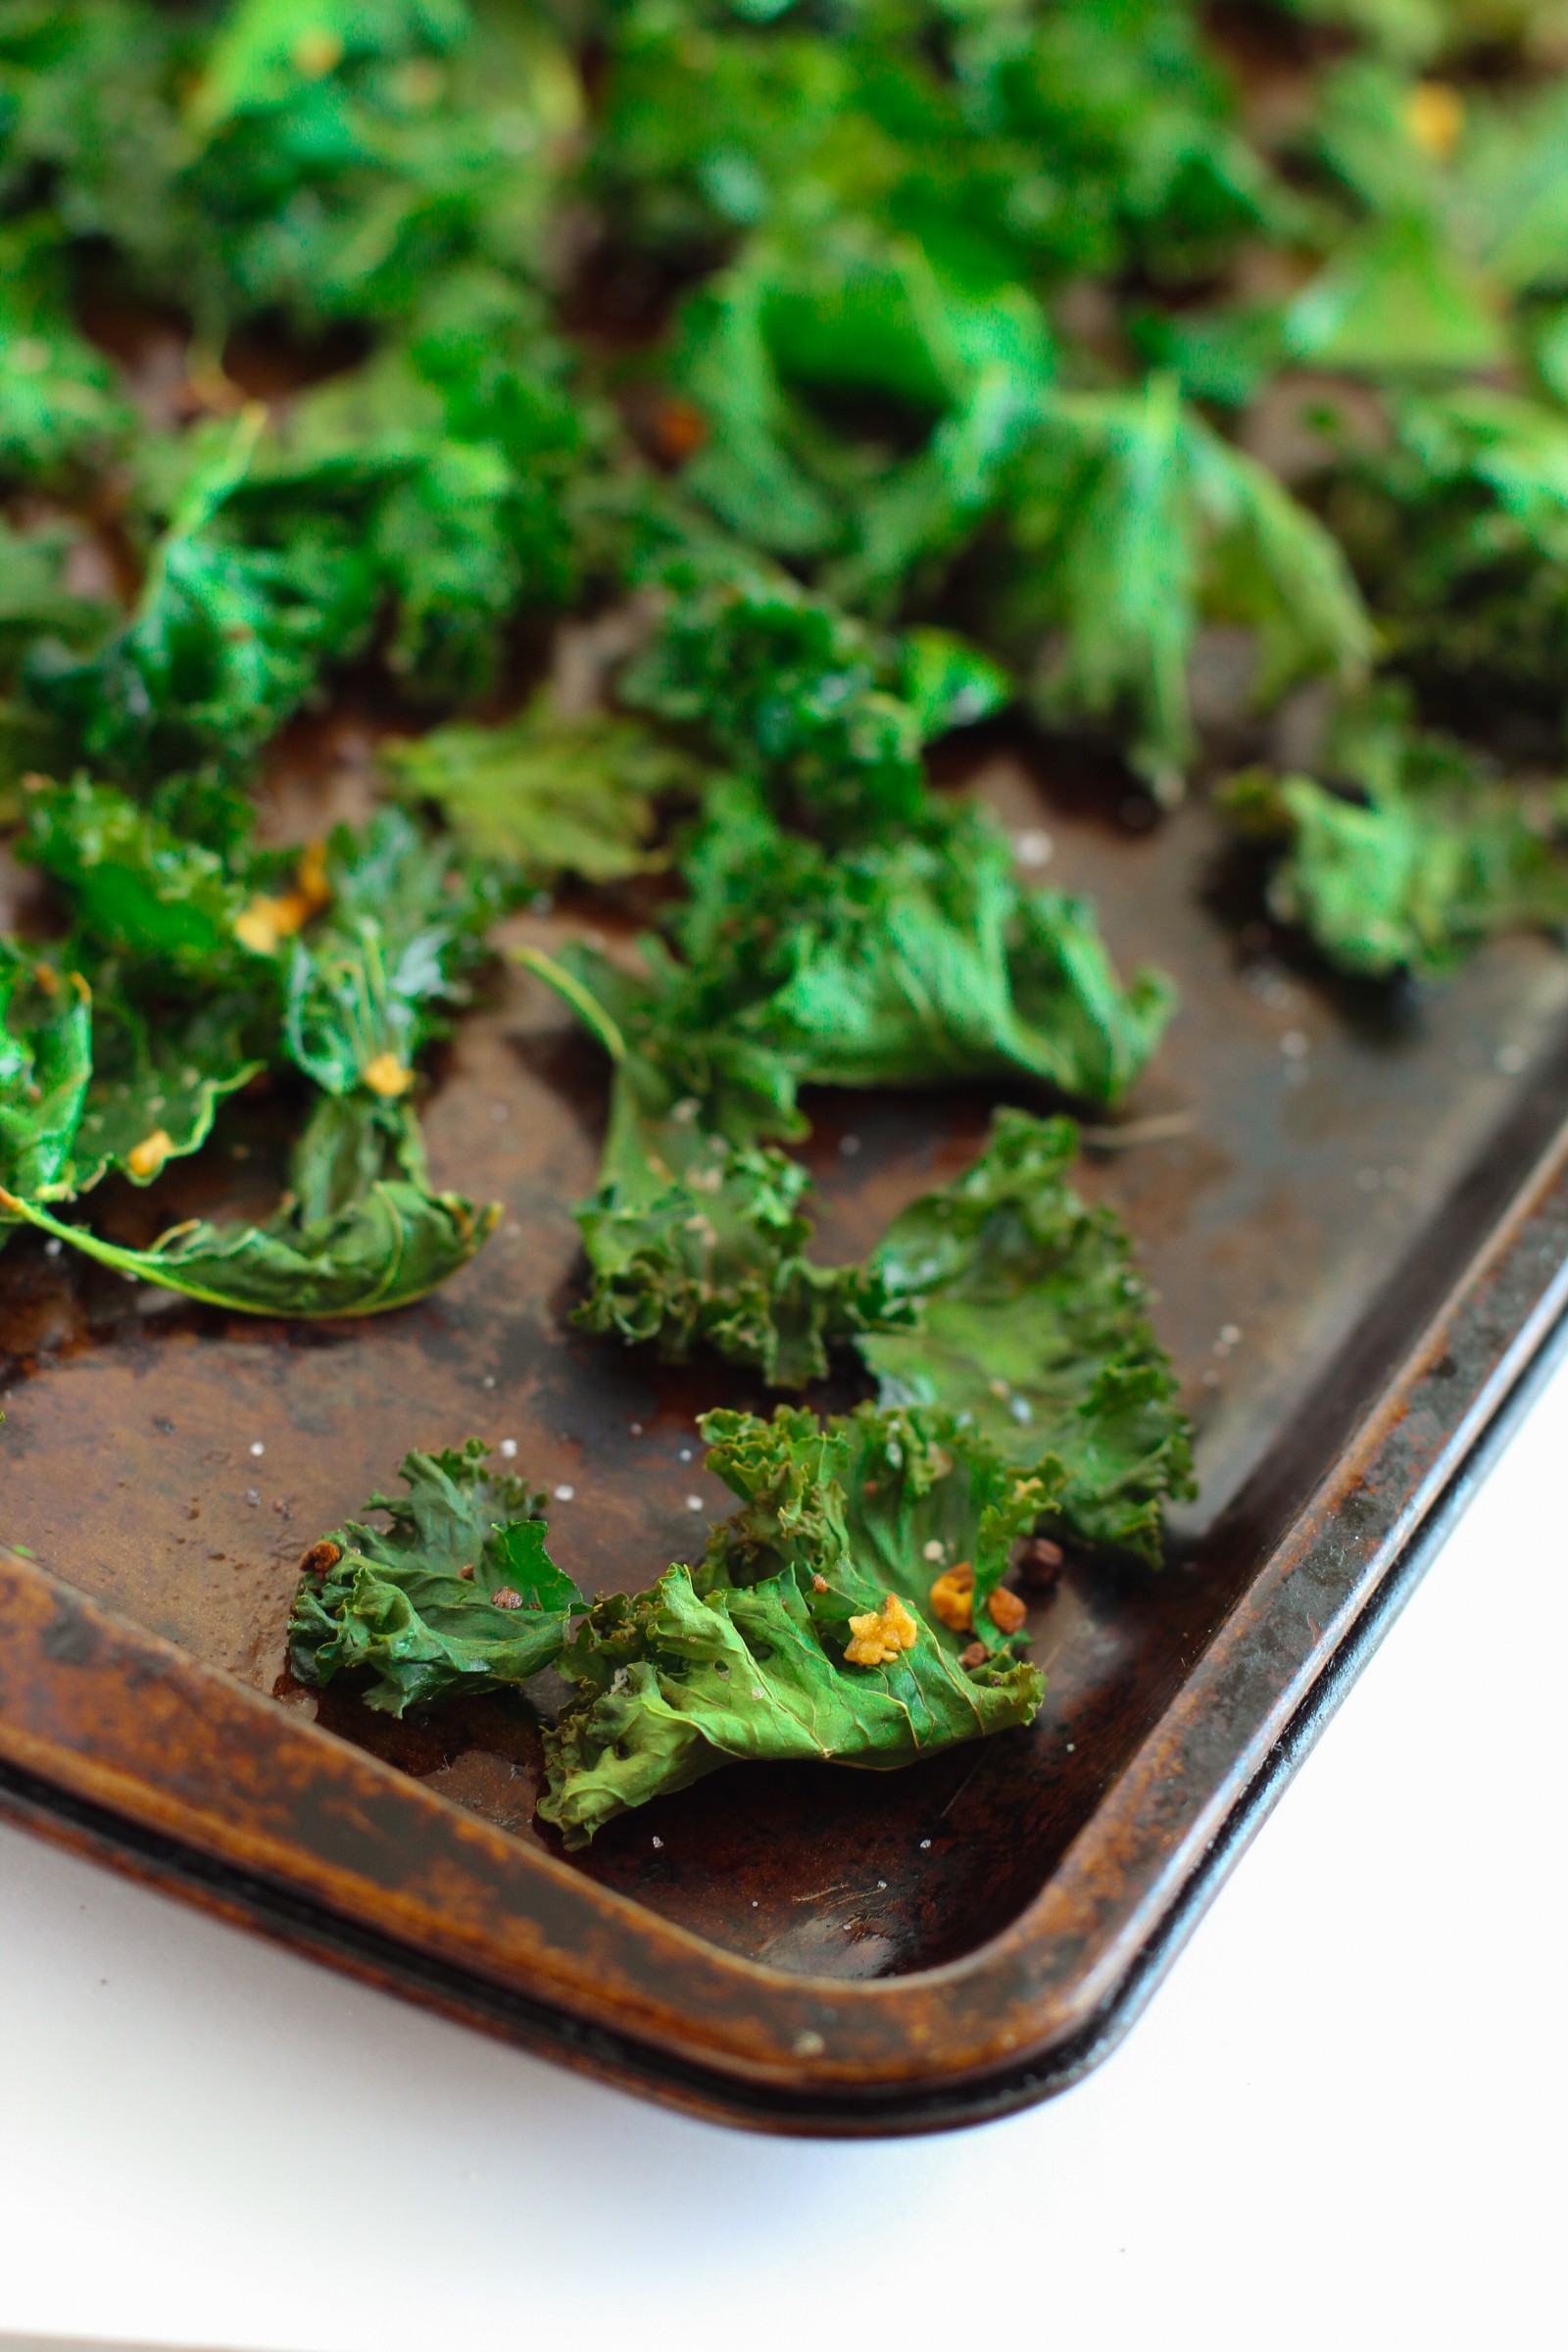 Kale chips that have been baked right out of the oven.